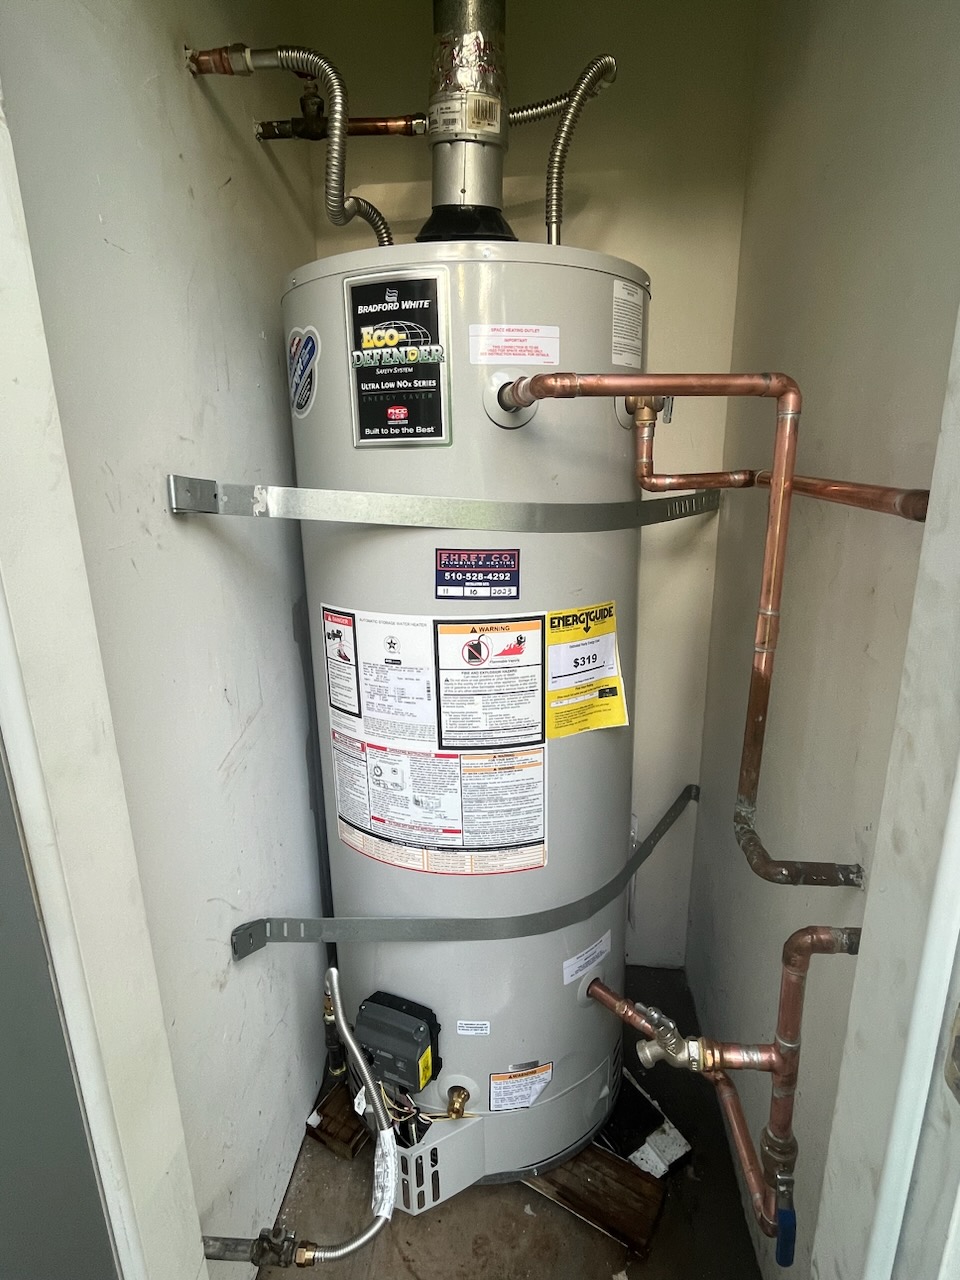 7 Excellent Reasons to Call a Residential Plumbing Service for Water Heater Problems - Ehret Plumbing & Heating